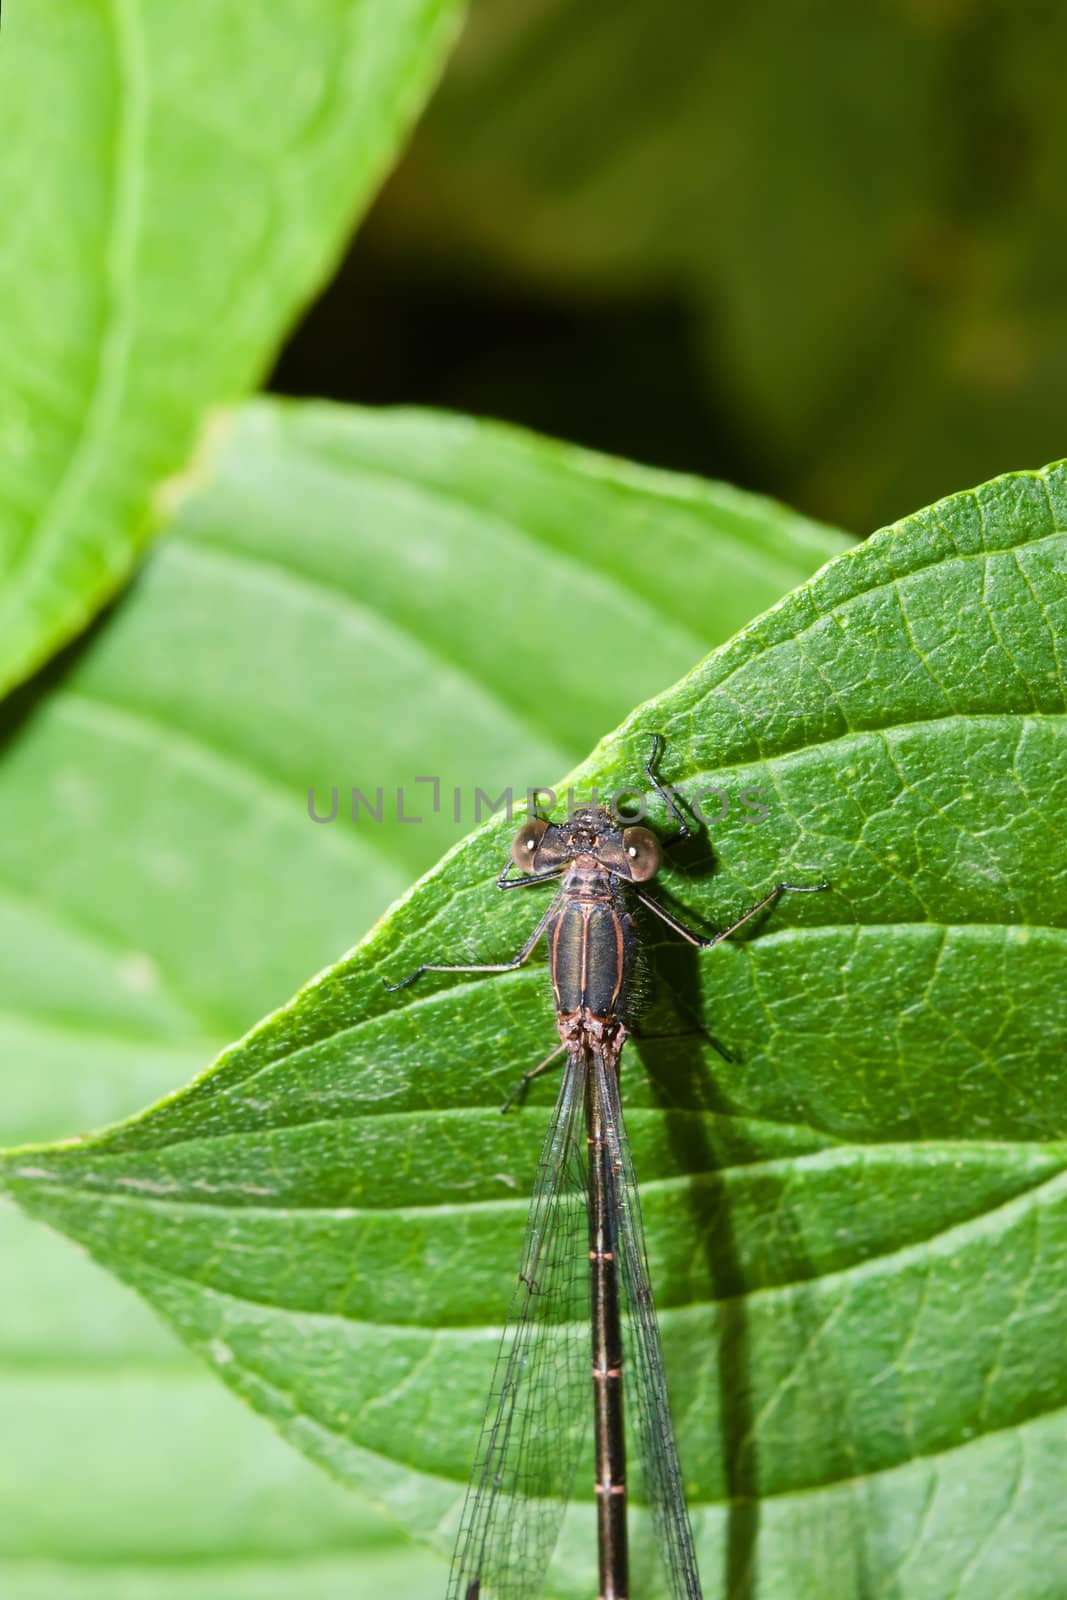 Female Common Blue Damselfly perched on a leaf.